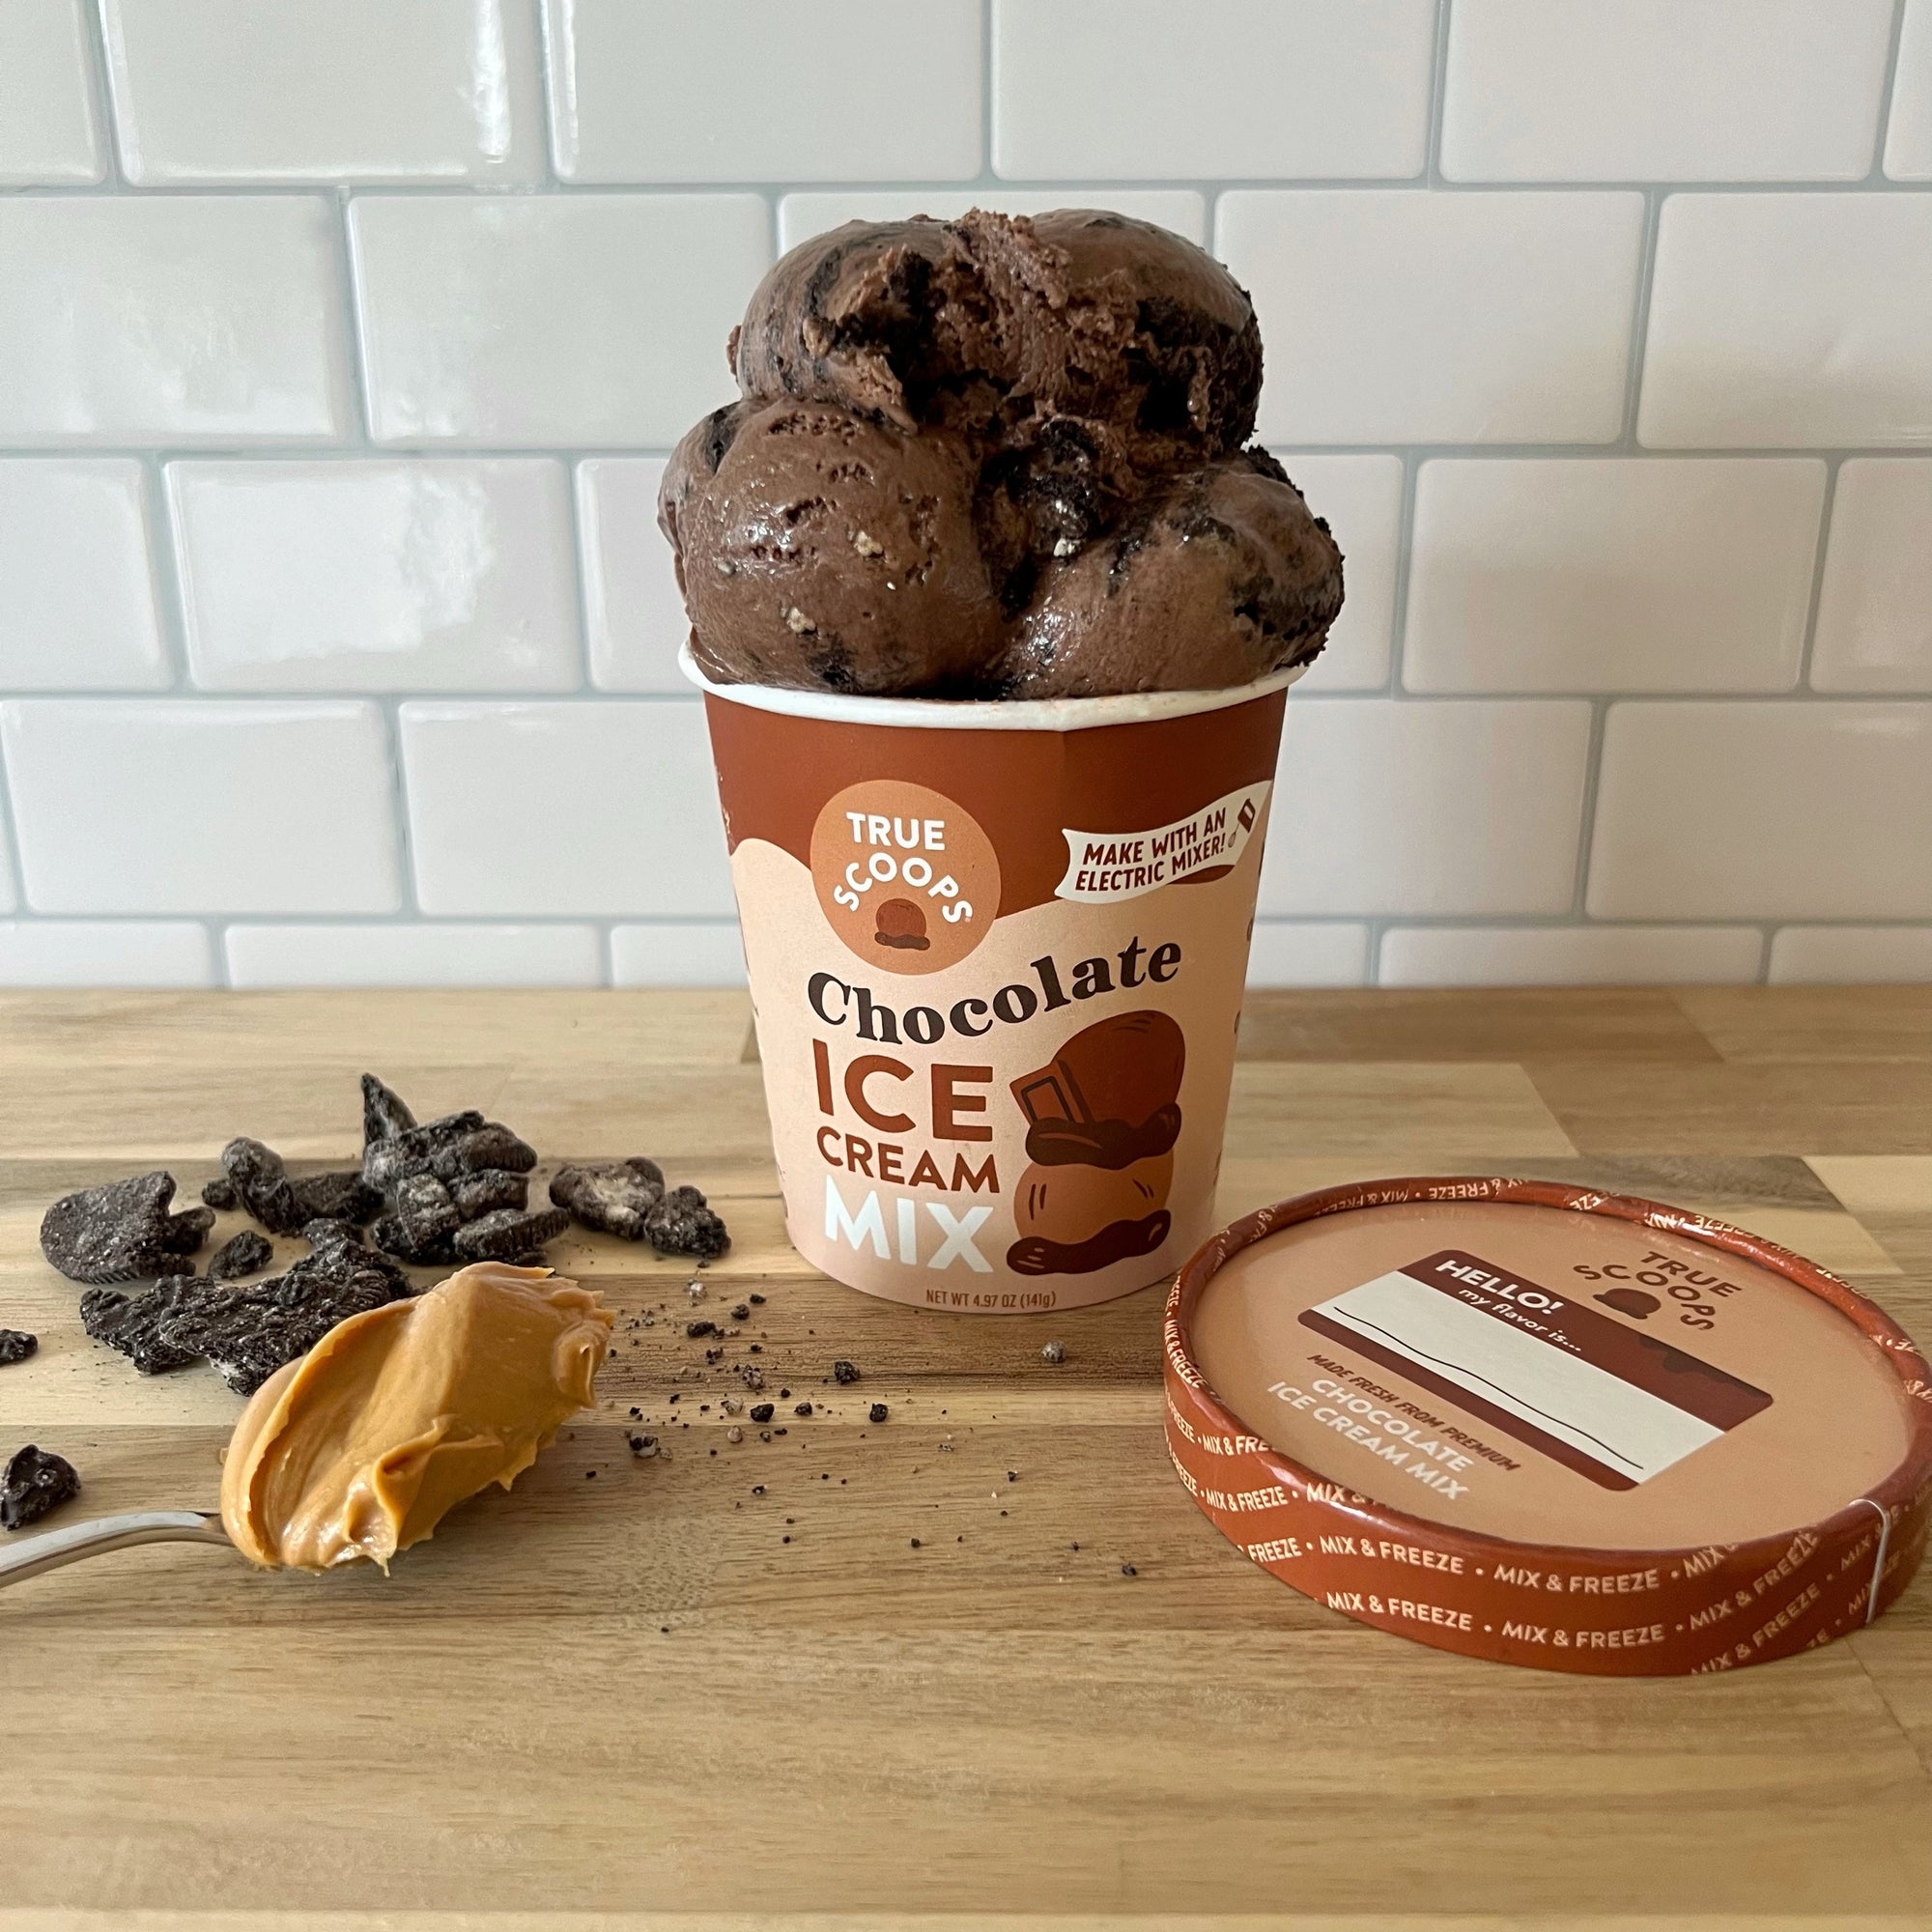 homemade chocolate, peanut butter, and oreo cookie ice cream by true scoops